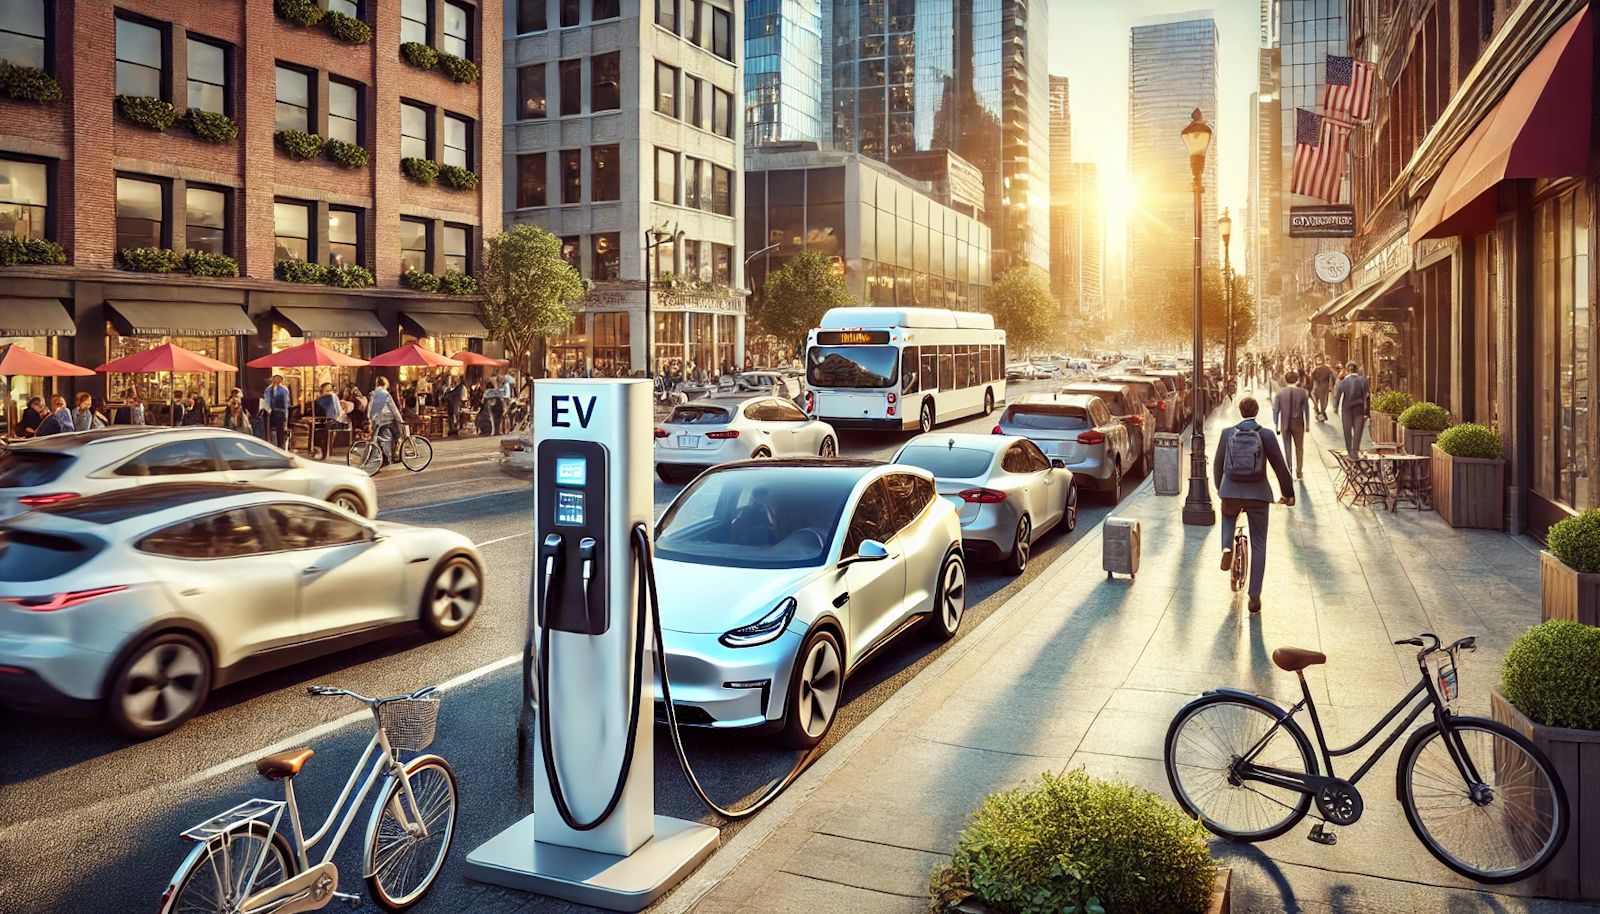 Morning rush hour on a city street with a modern electric vehicle (EV) charging station, surrounded by luxury sedans and compact cars, cyclists, and pedestrians, showcasing sustainable urban transportation.